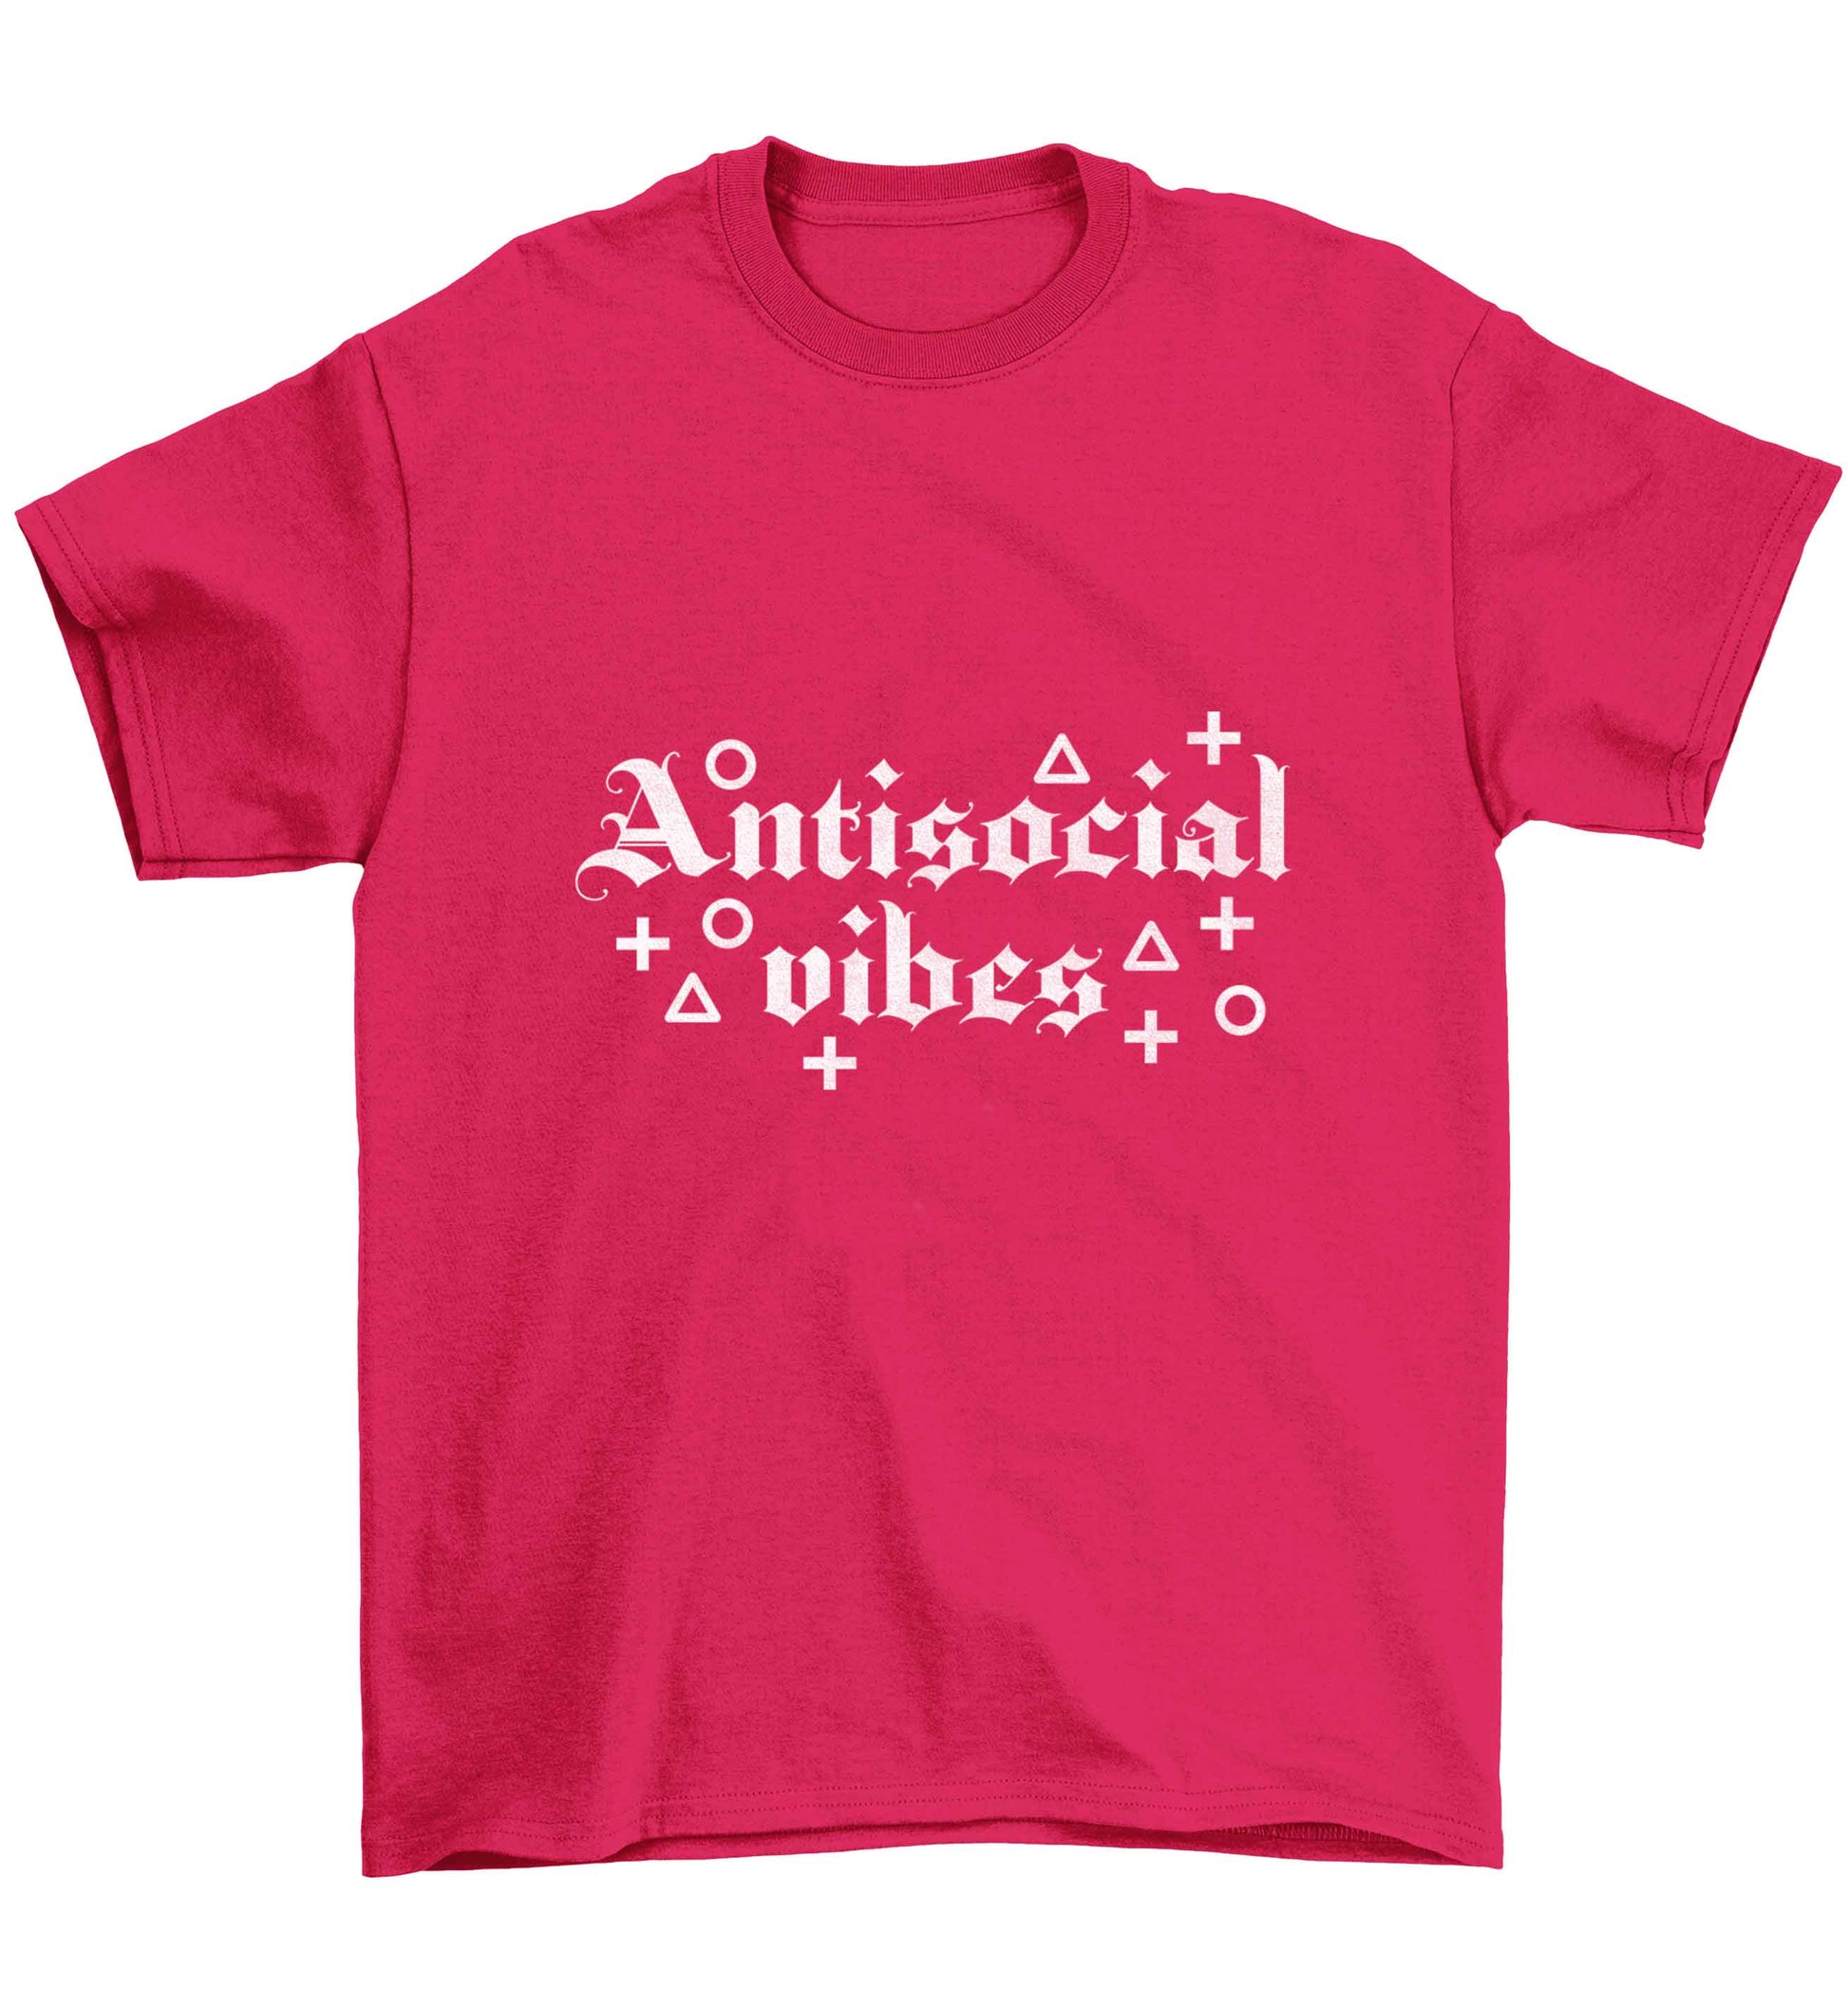 Antisocial vibes Children's pink Tshirt 12-13 Years